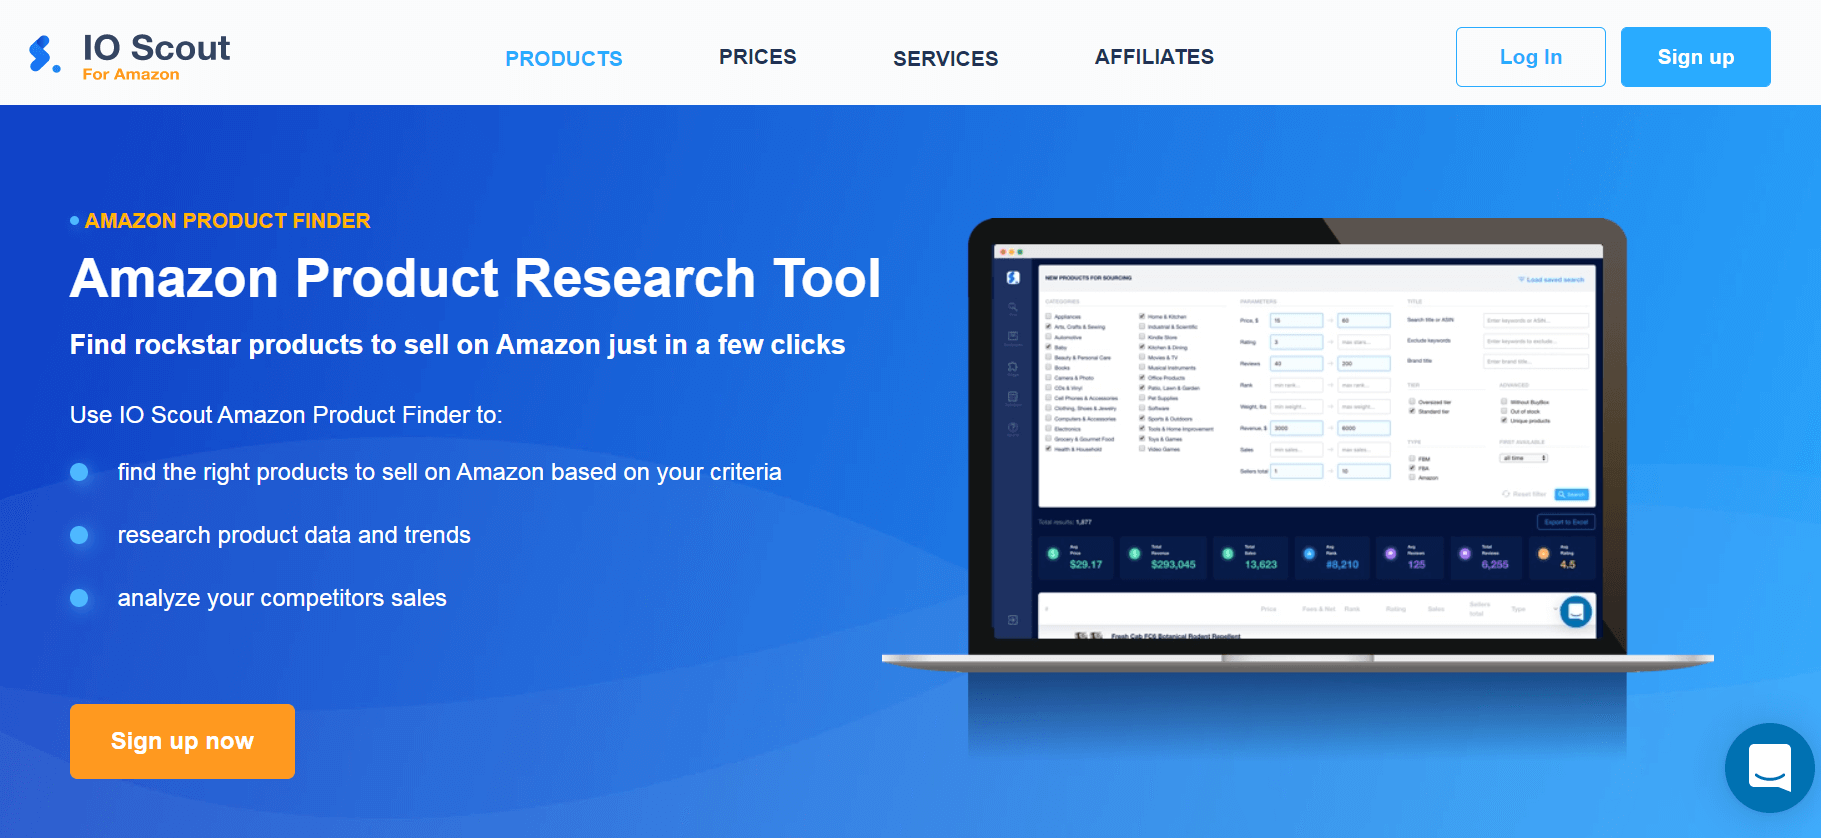 Amazon Product Research Tool by IO Scout